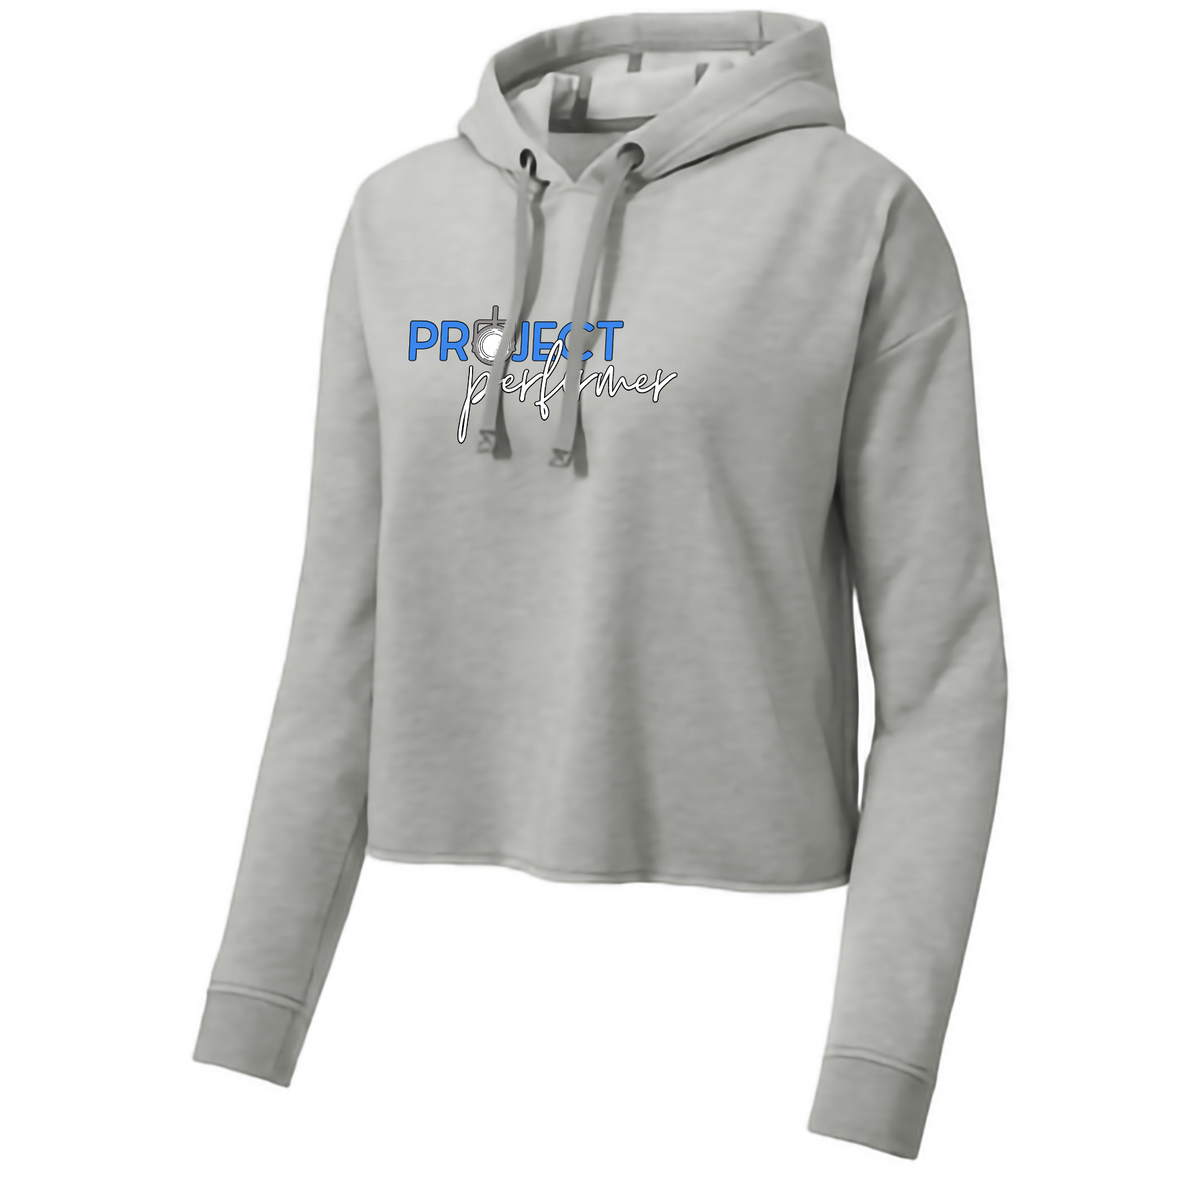 Project Performer Cropped Sweatshirt